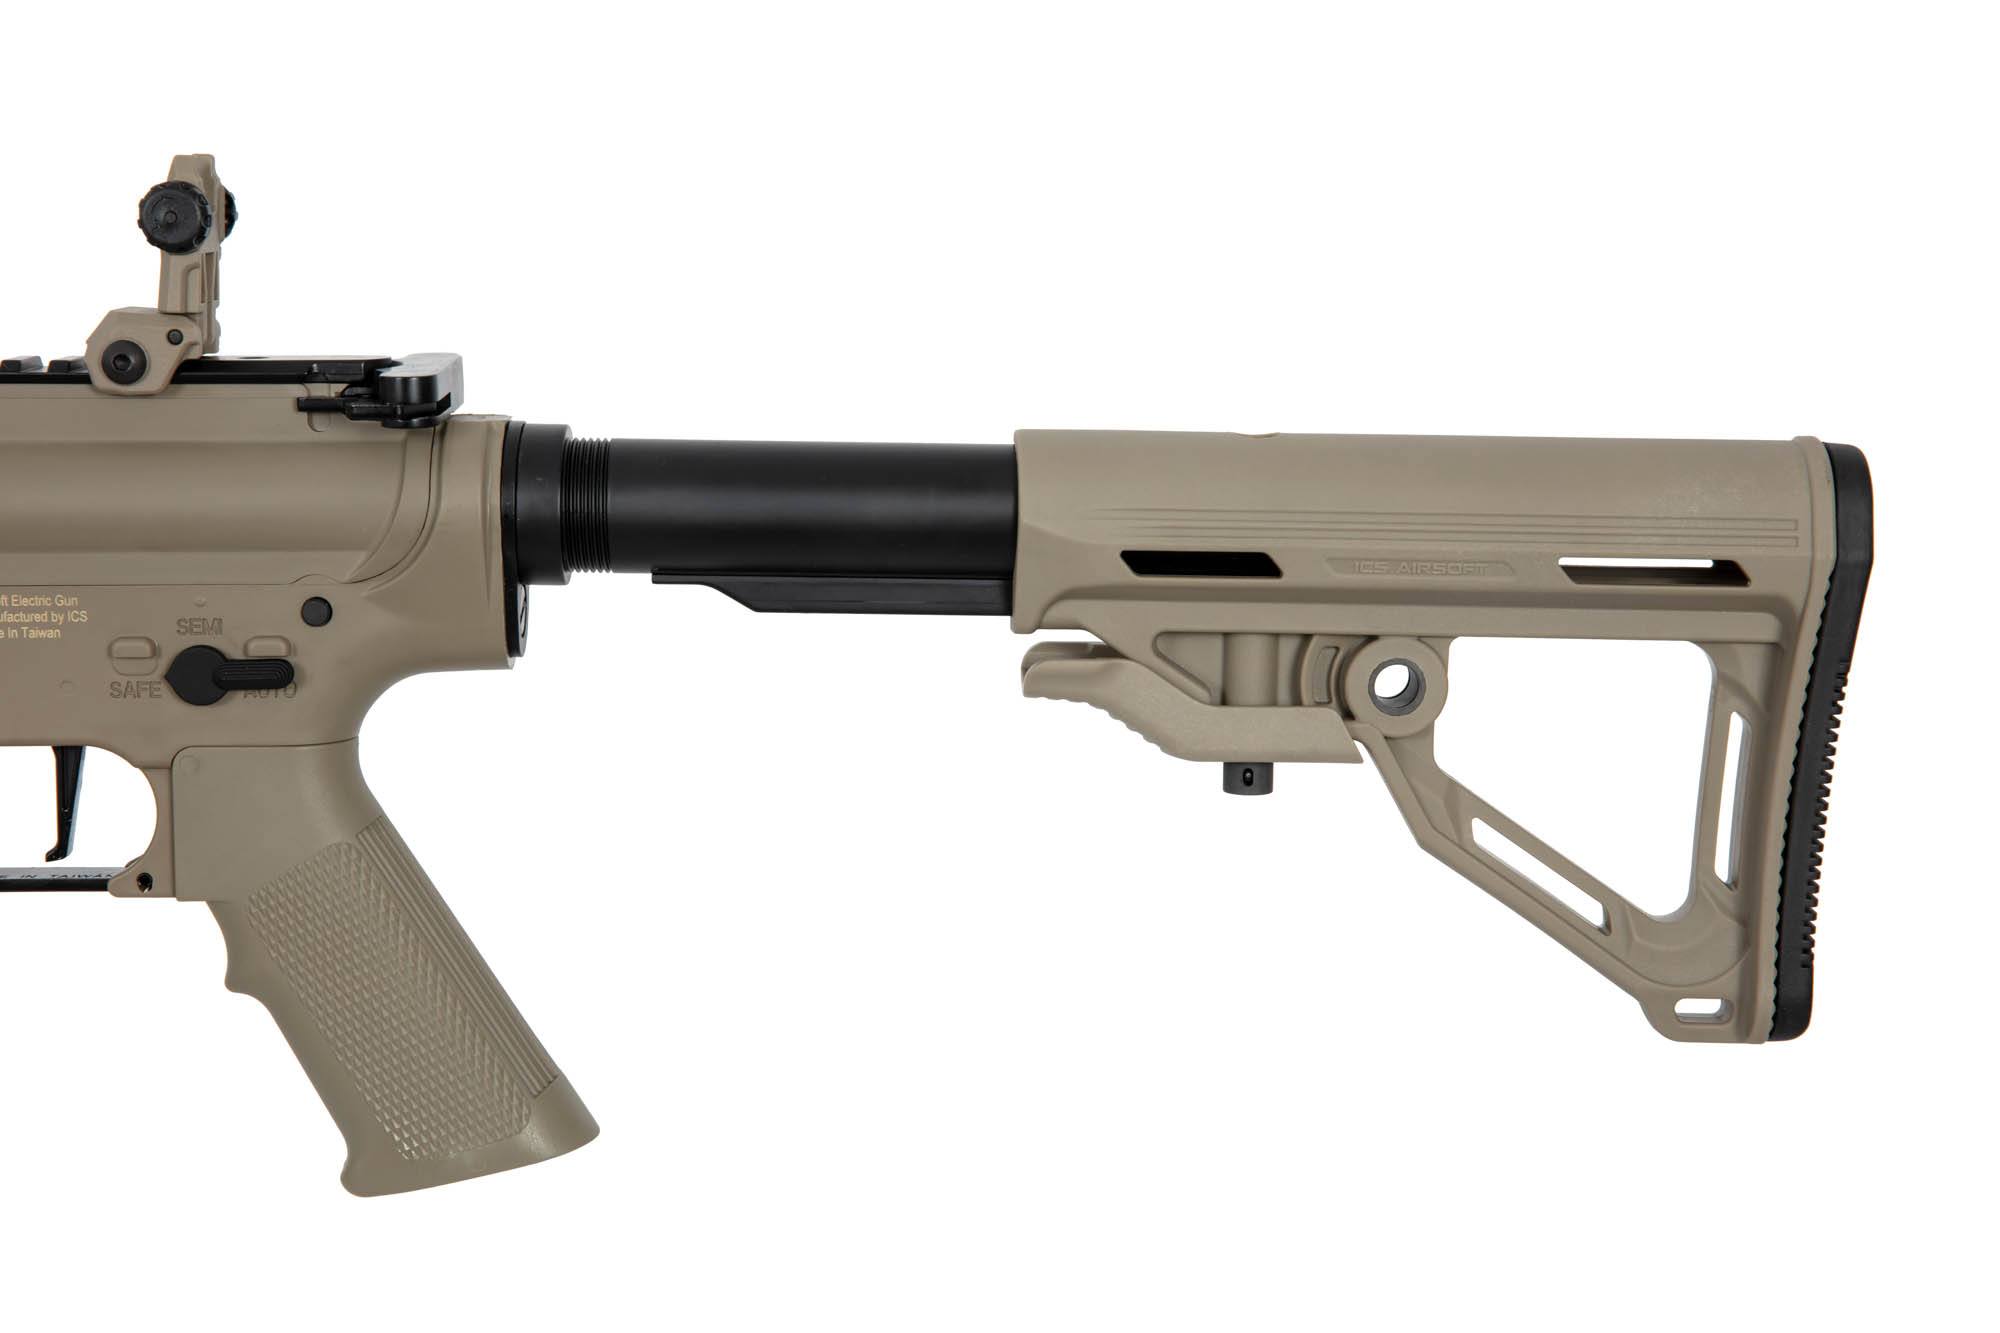 Airsoft Rifle Lightway-Peleador C S3 2.0 MTR ICS - tan by ICS on Airsoft Mania Europe